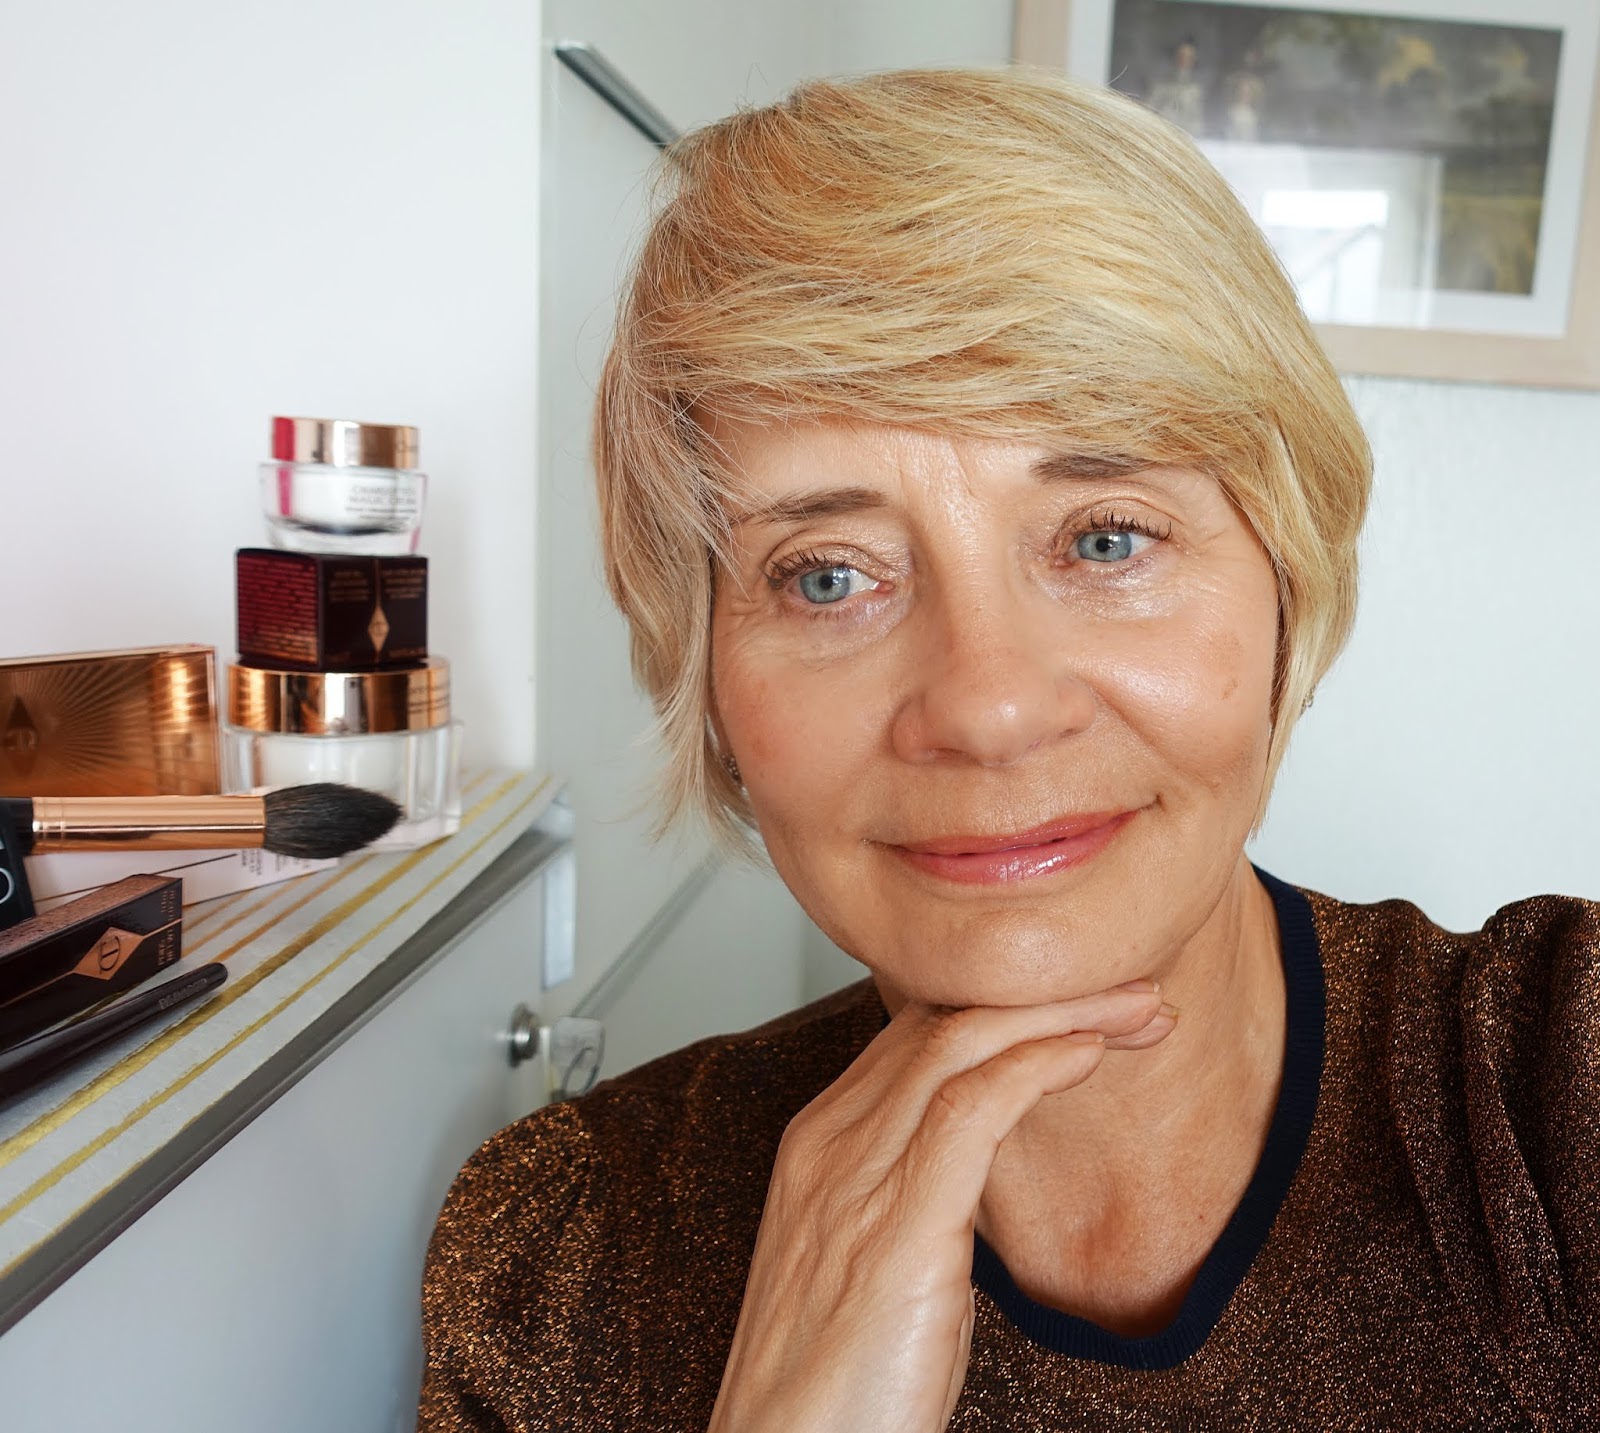 The end result after recreating the Charlotte Tilbury Golden Goddess look, shown on a woman aged 50 plus